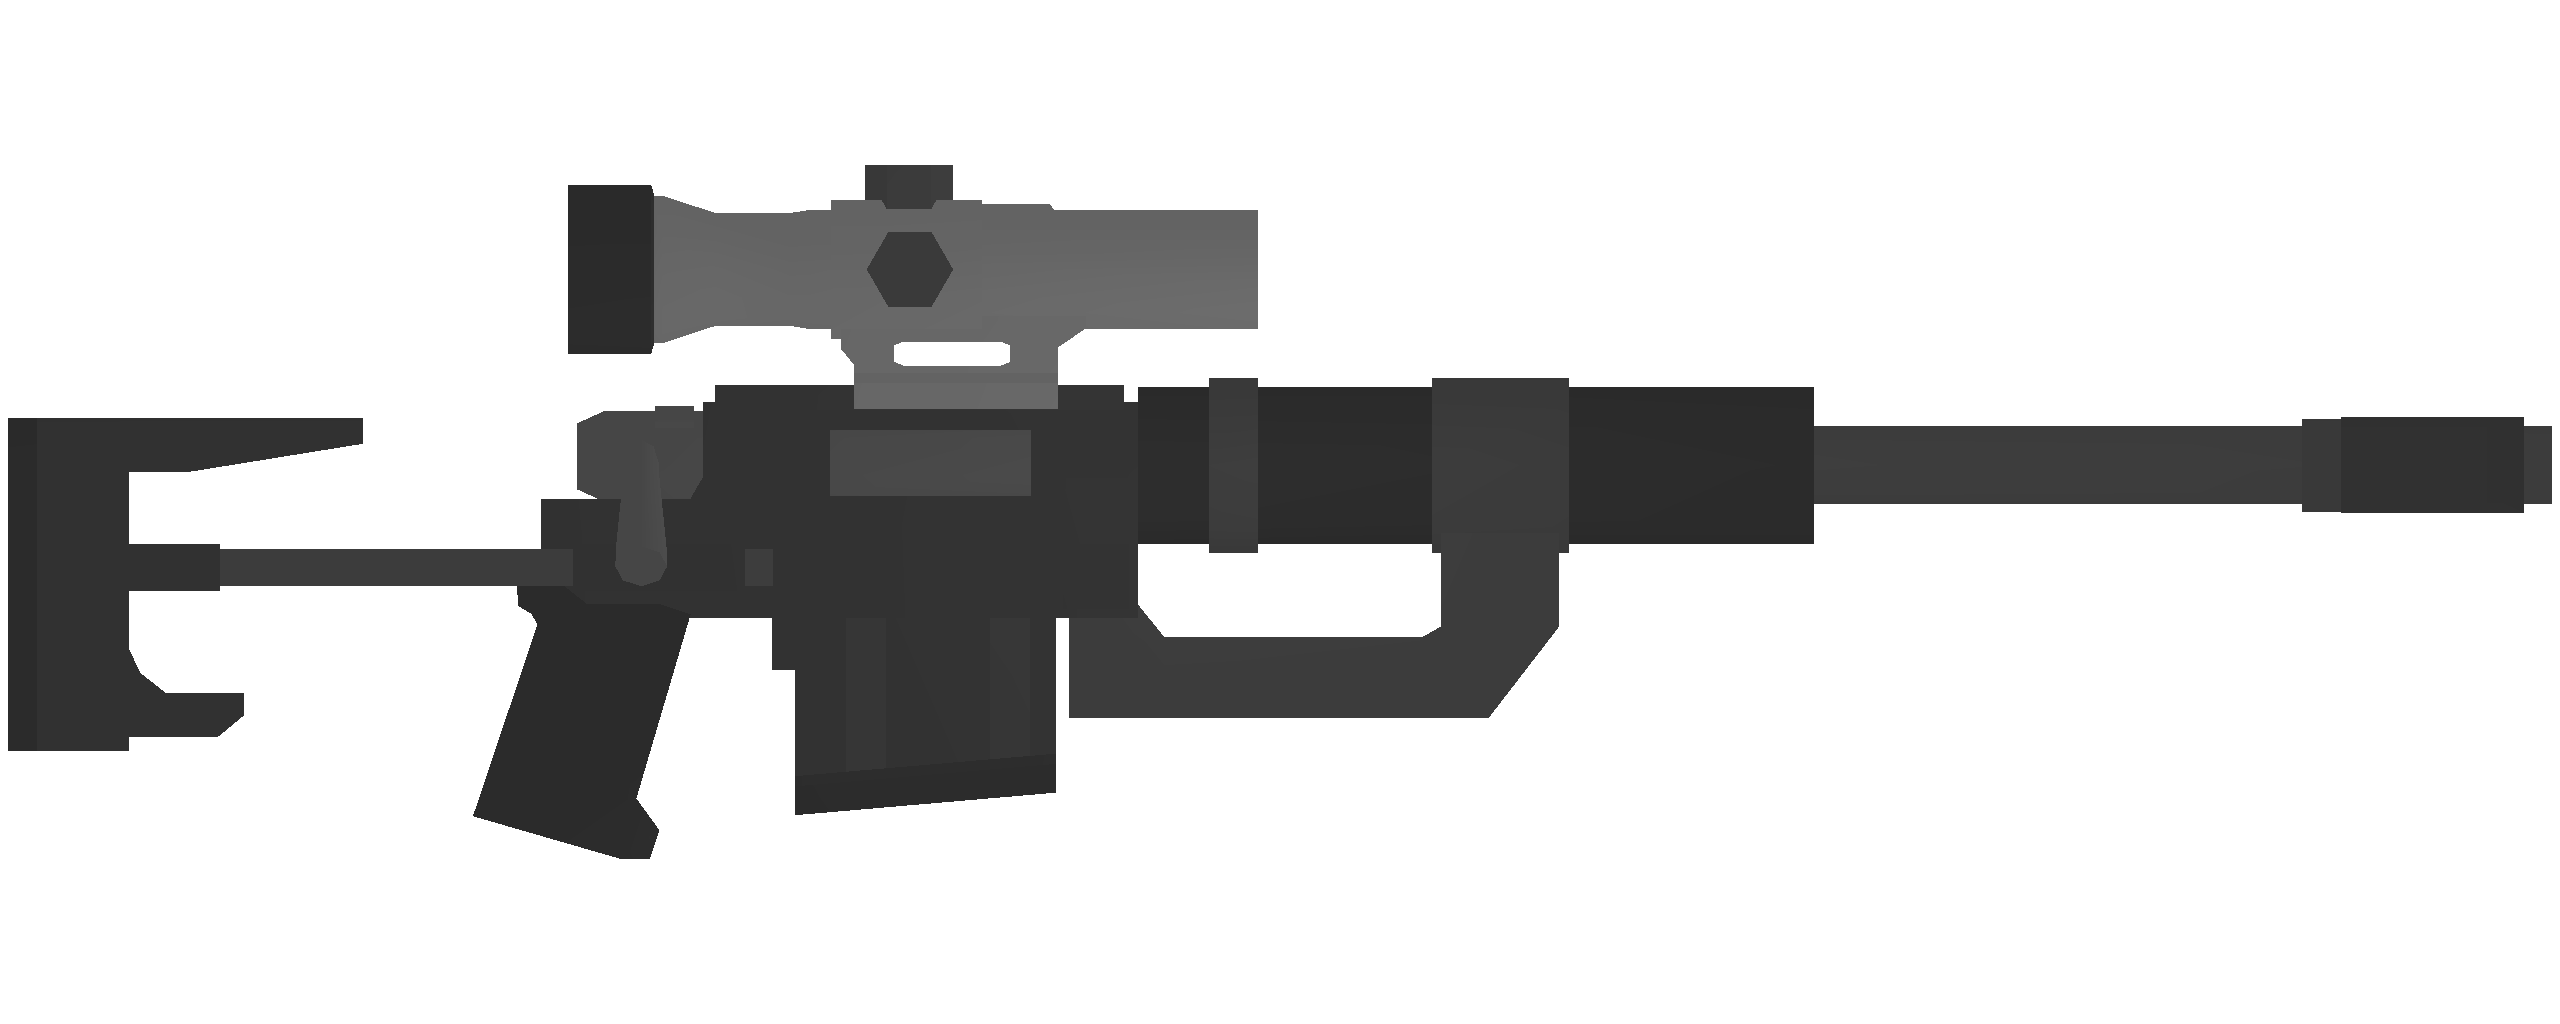 Unturned - Kuwait Items Redux + ID List for Magazines and Attachments - Sniper Rifles - 0F89F36